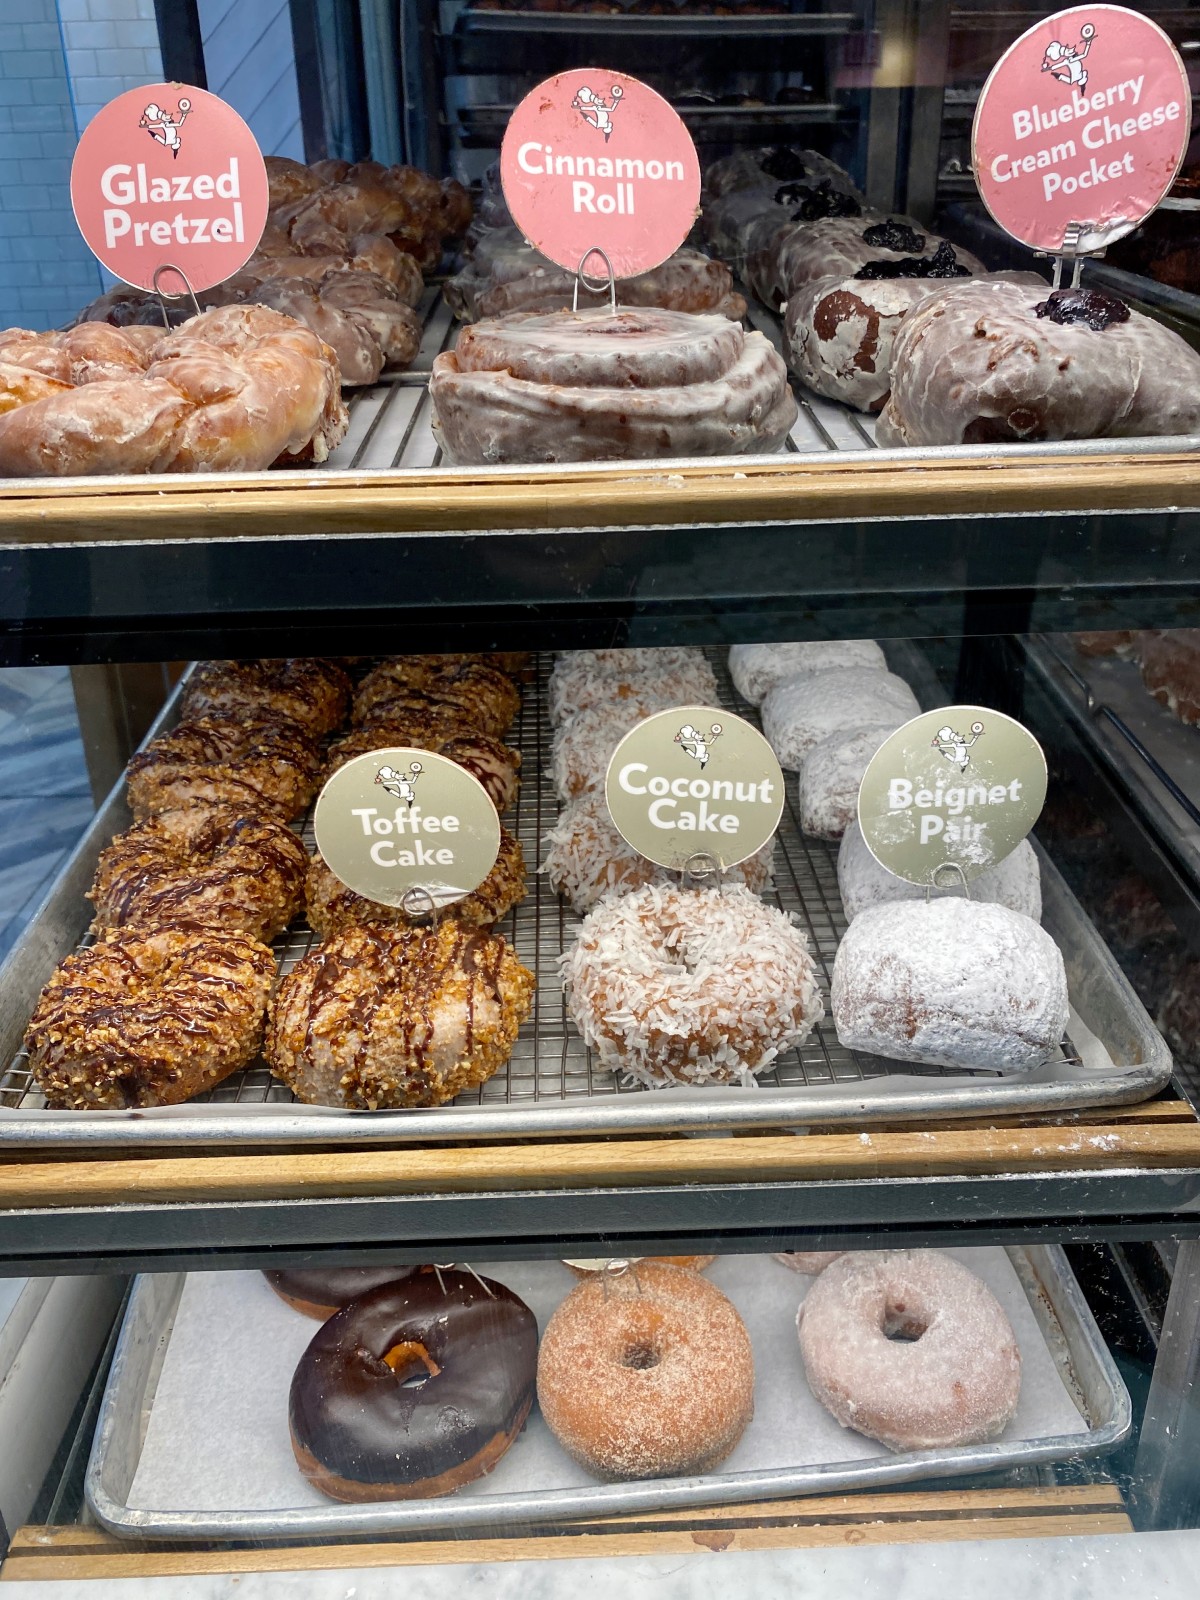 Where to find the best donuts in Chicago - Stan's Donuts has an insane selection